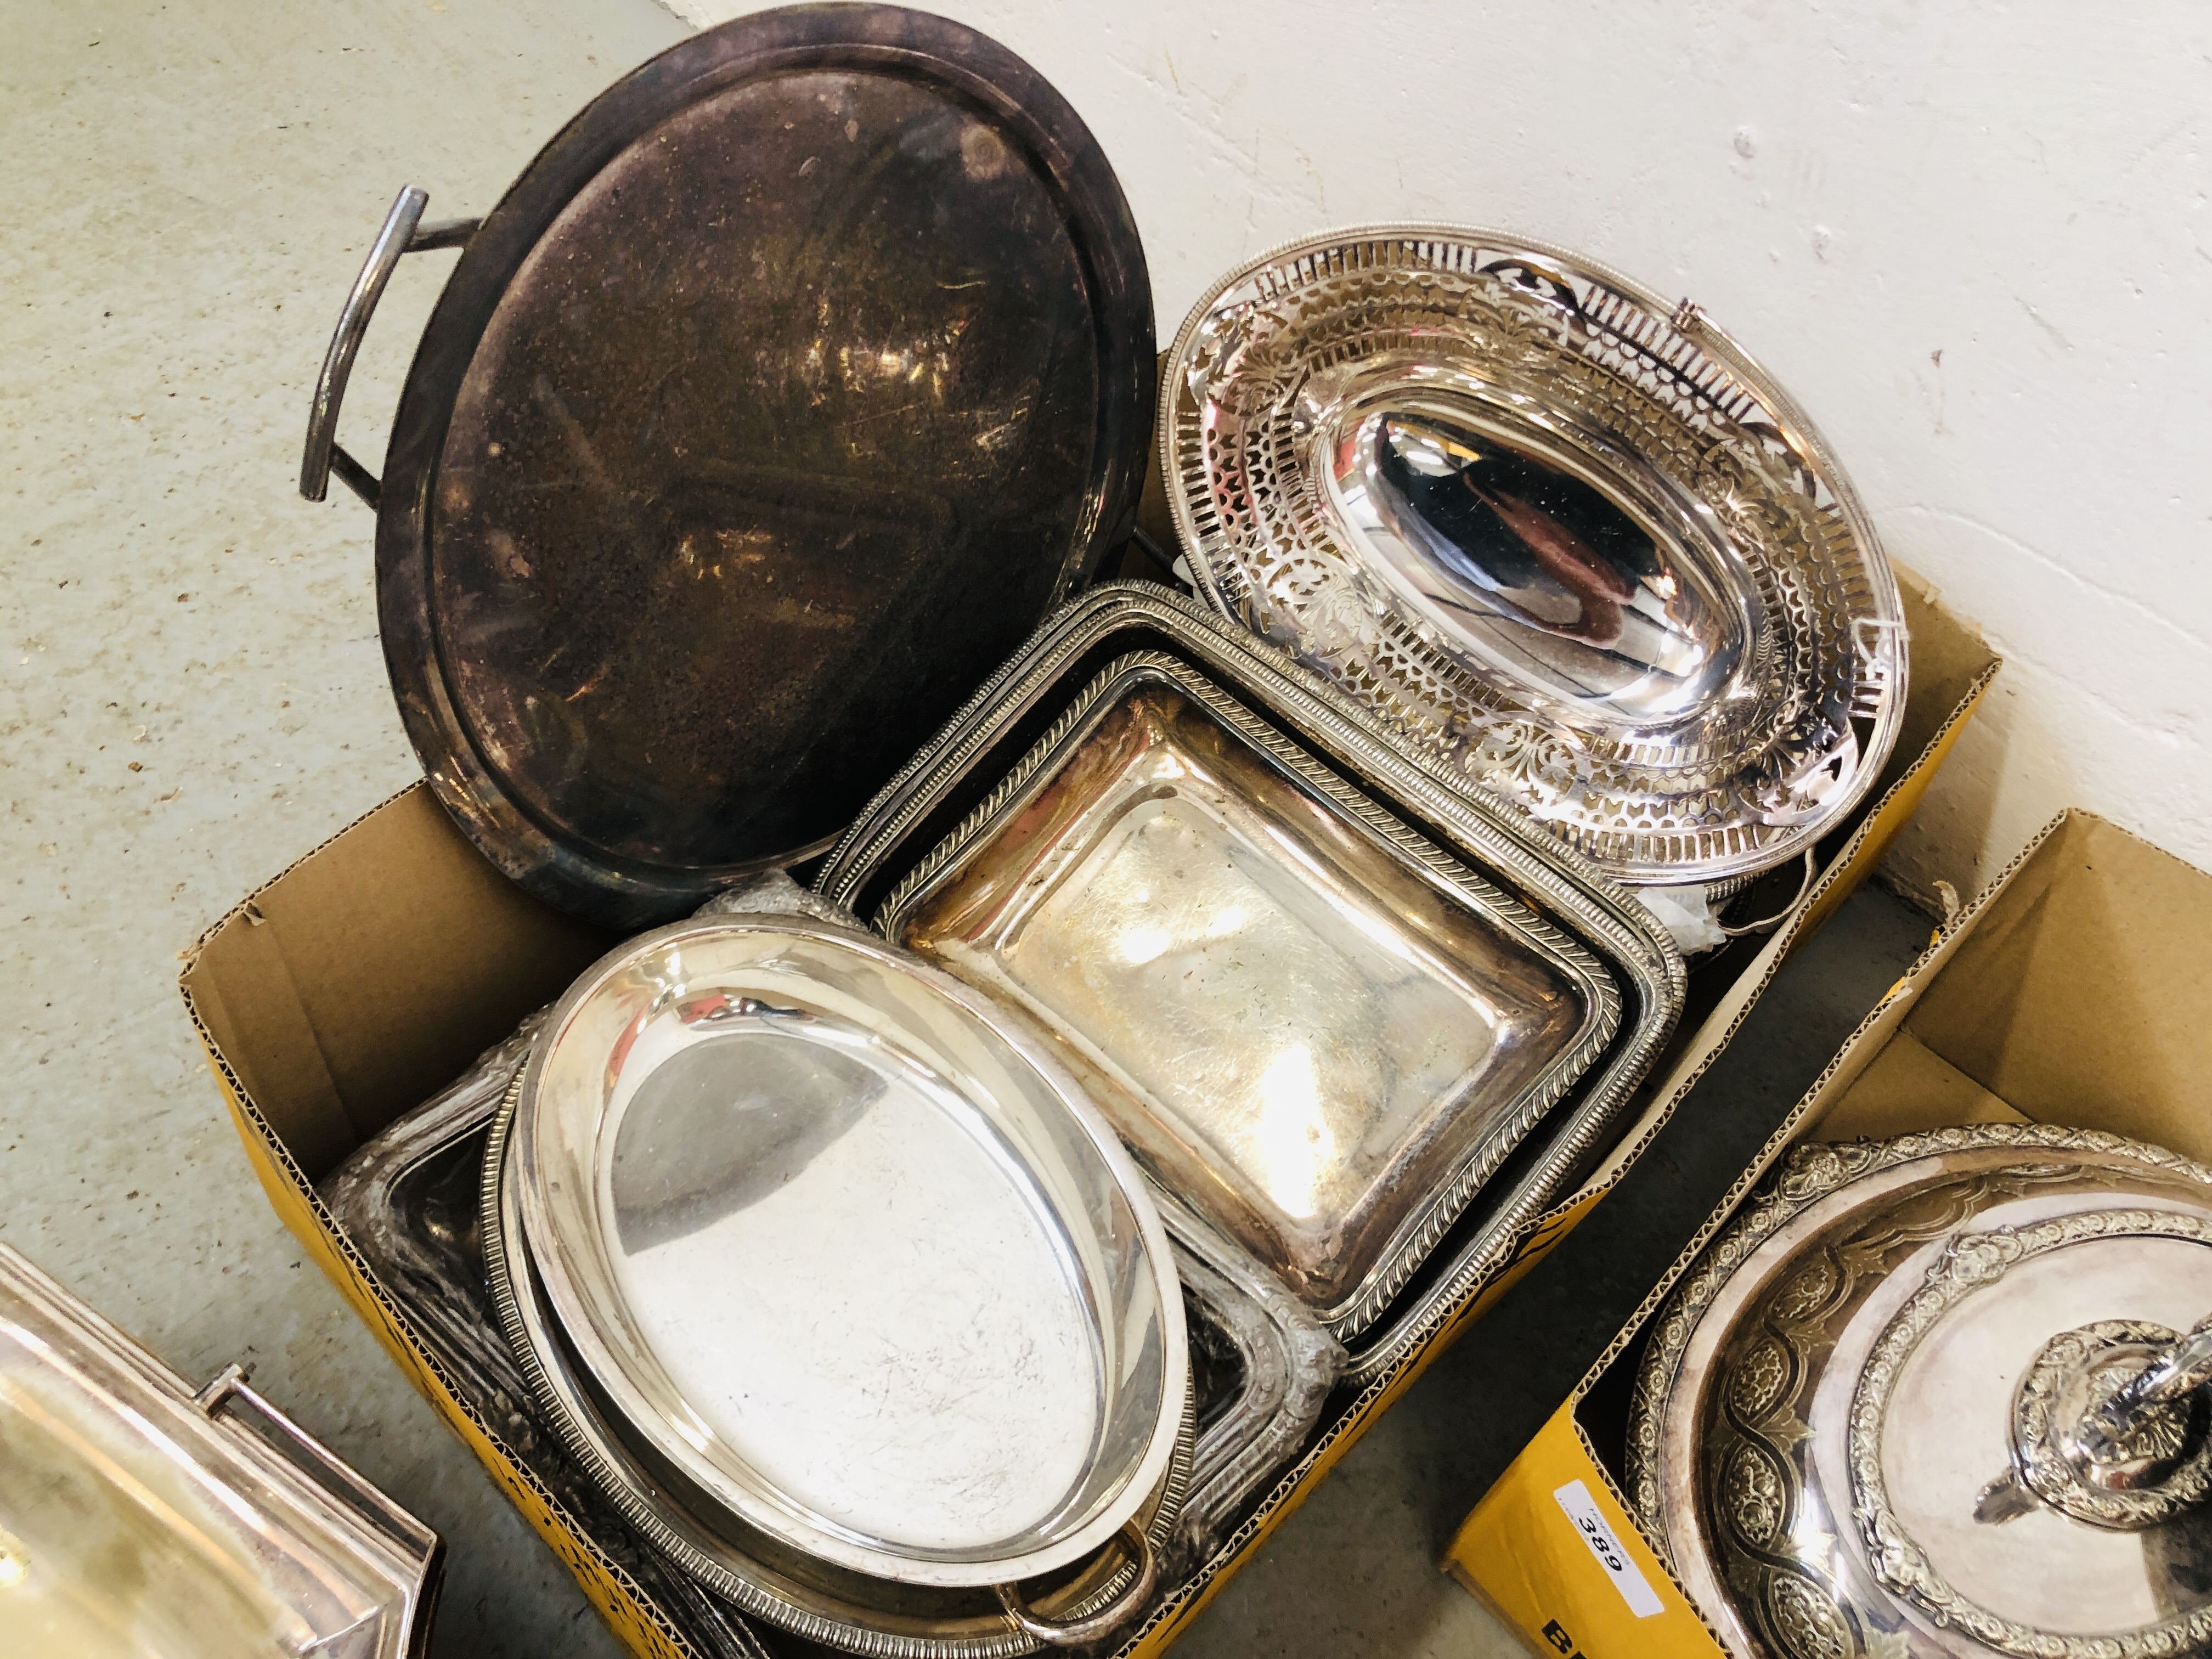 TWO BOXES CONTAINING AN EXTENSIVE COLLECTION OF SILVER PLATED TUREENS AND HANDLES, TWO HANDLED TRAY, - Image 7 of 7